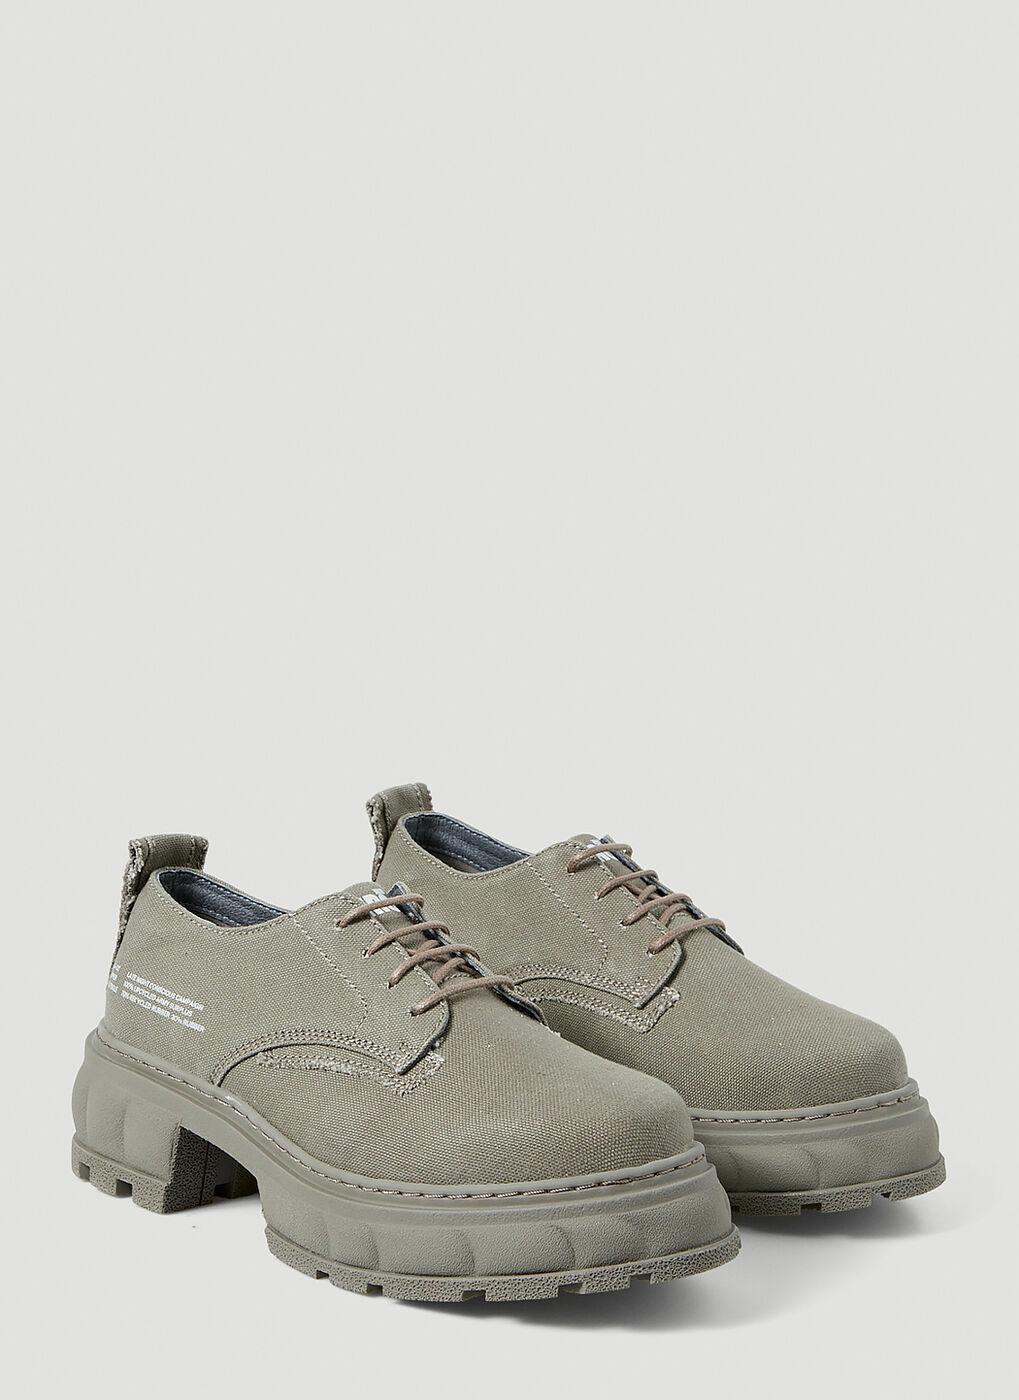 x LN-CC Alter Shoes in Grey Viron